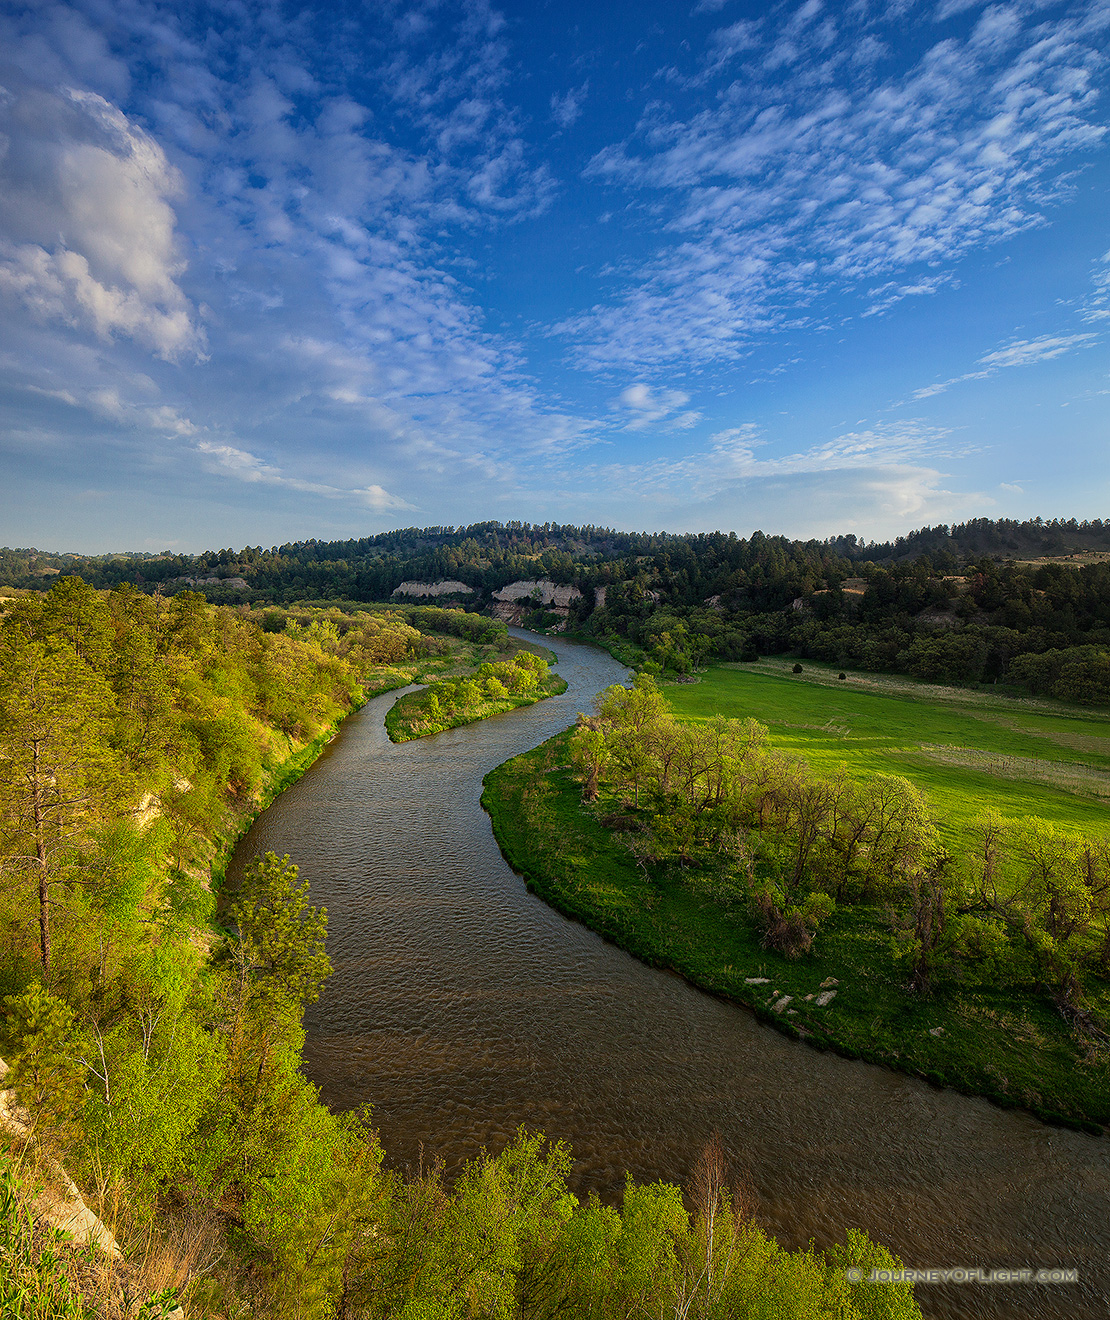 The Niobrara river, snakes through a lush green valley on a beautiful spring morning. A cool breeze blew gently as the sun rose in the east illuminating the clouds in the sky. - Valentine Picture